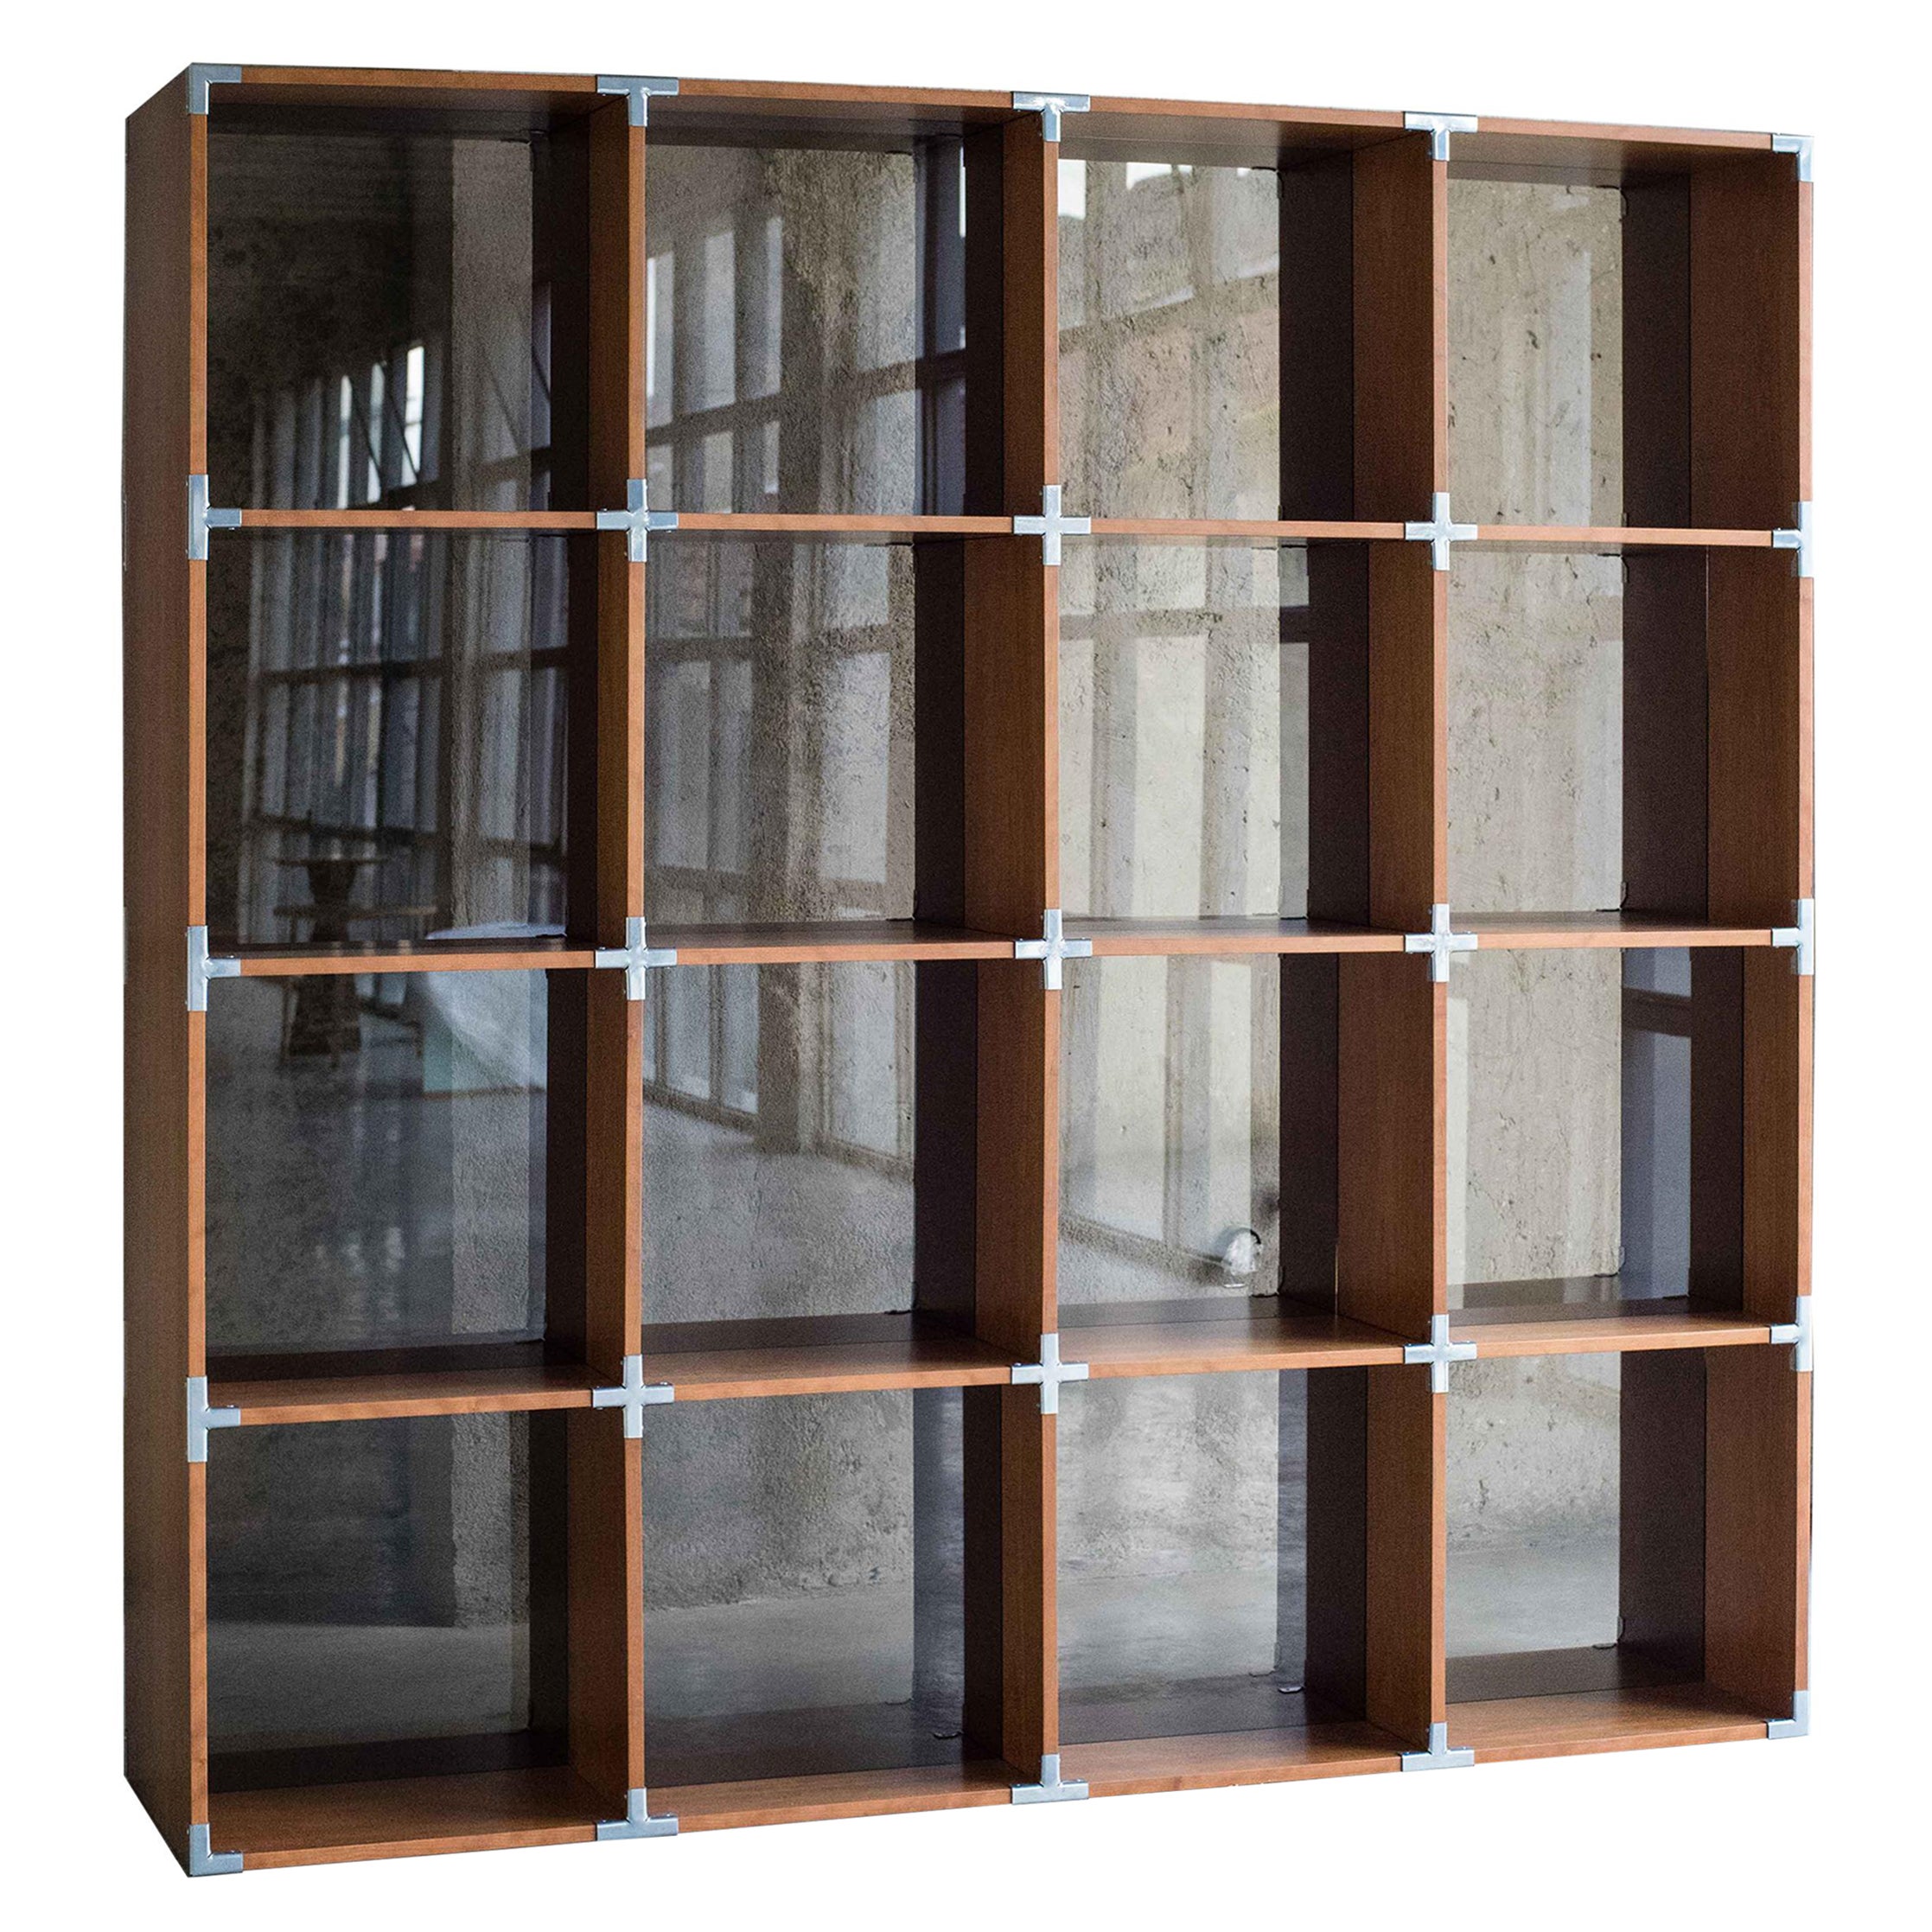 BIS Bookshelf by MOB For Sale